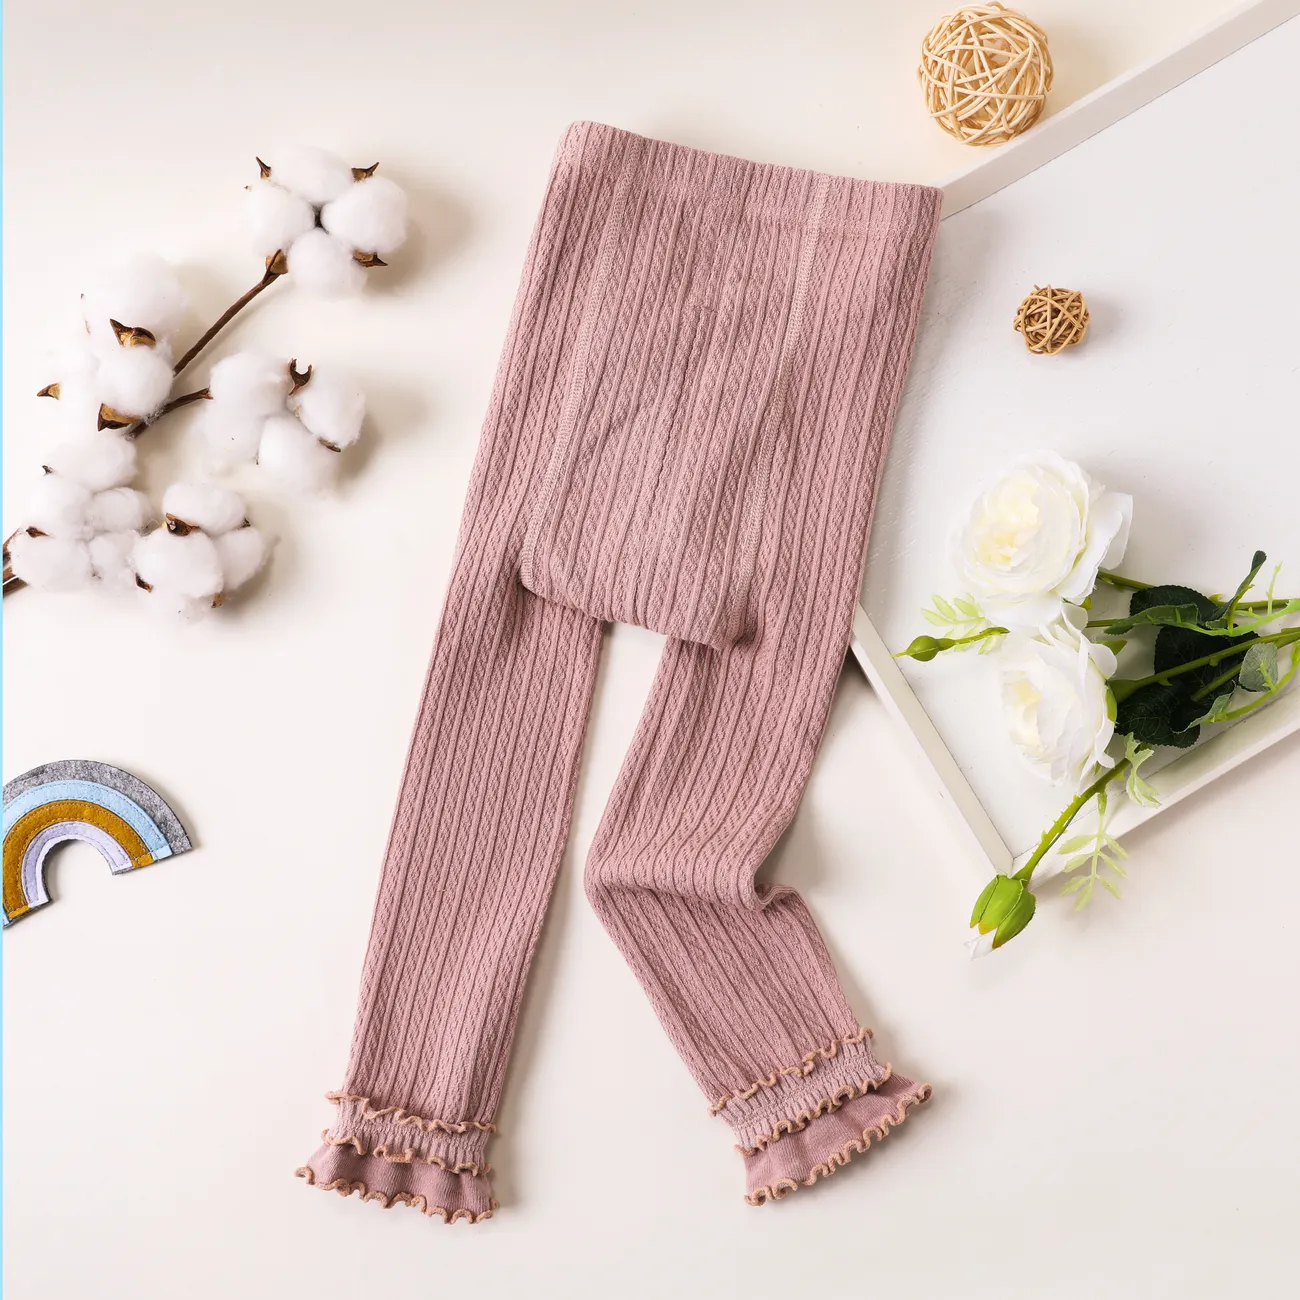 Baby/toddler Three-Layered Cotton Leggings with Elegant Edging and Shiny Thread, Features Dual-Purpose Design for Bottom and Leggings Mauve Pink big image 1